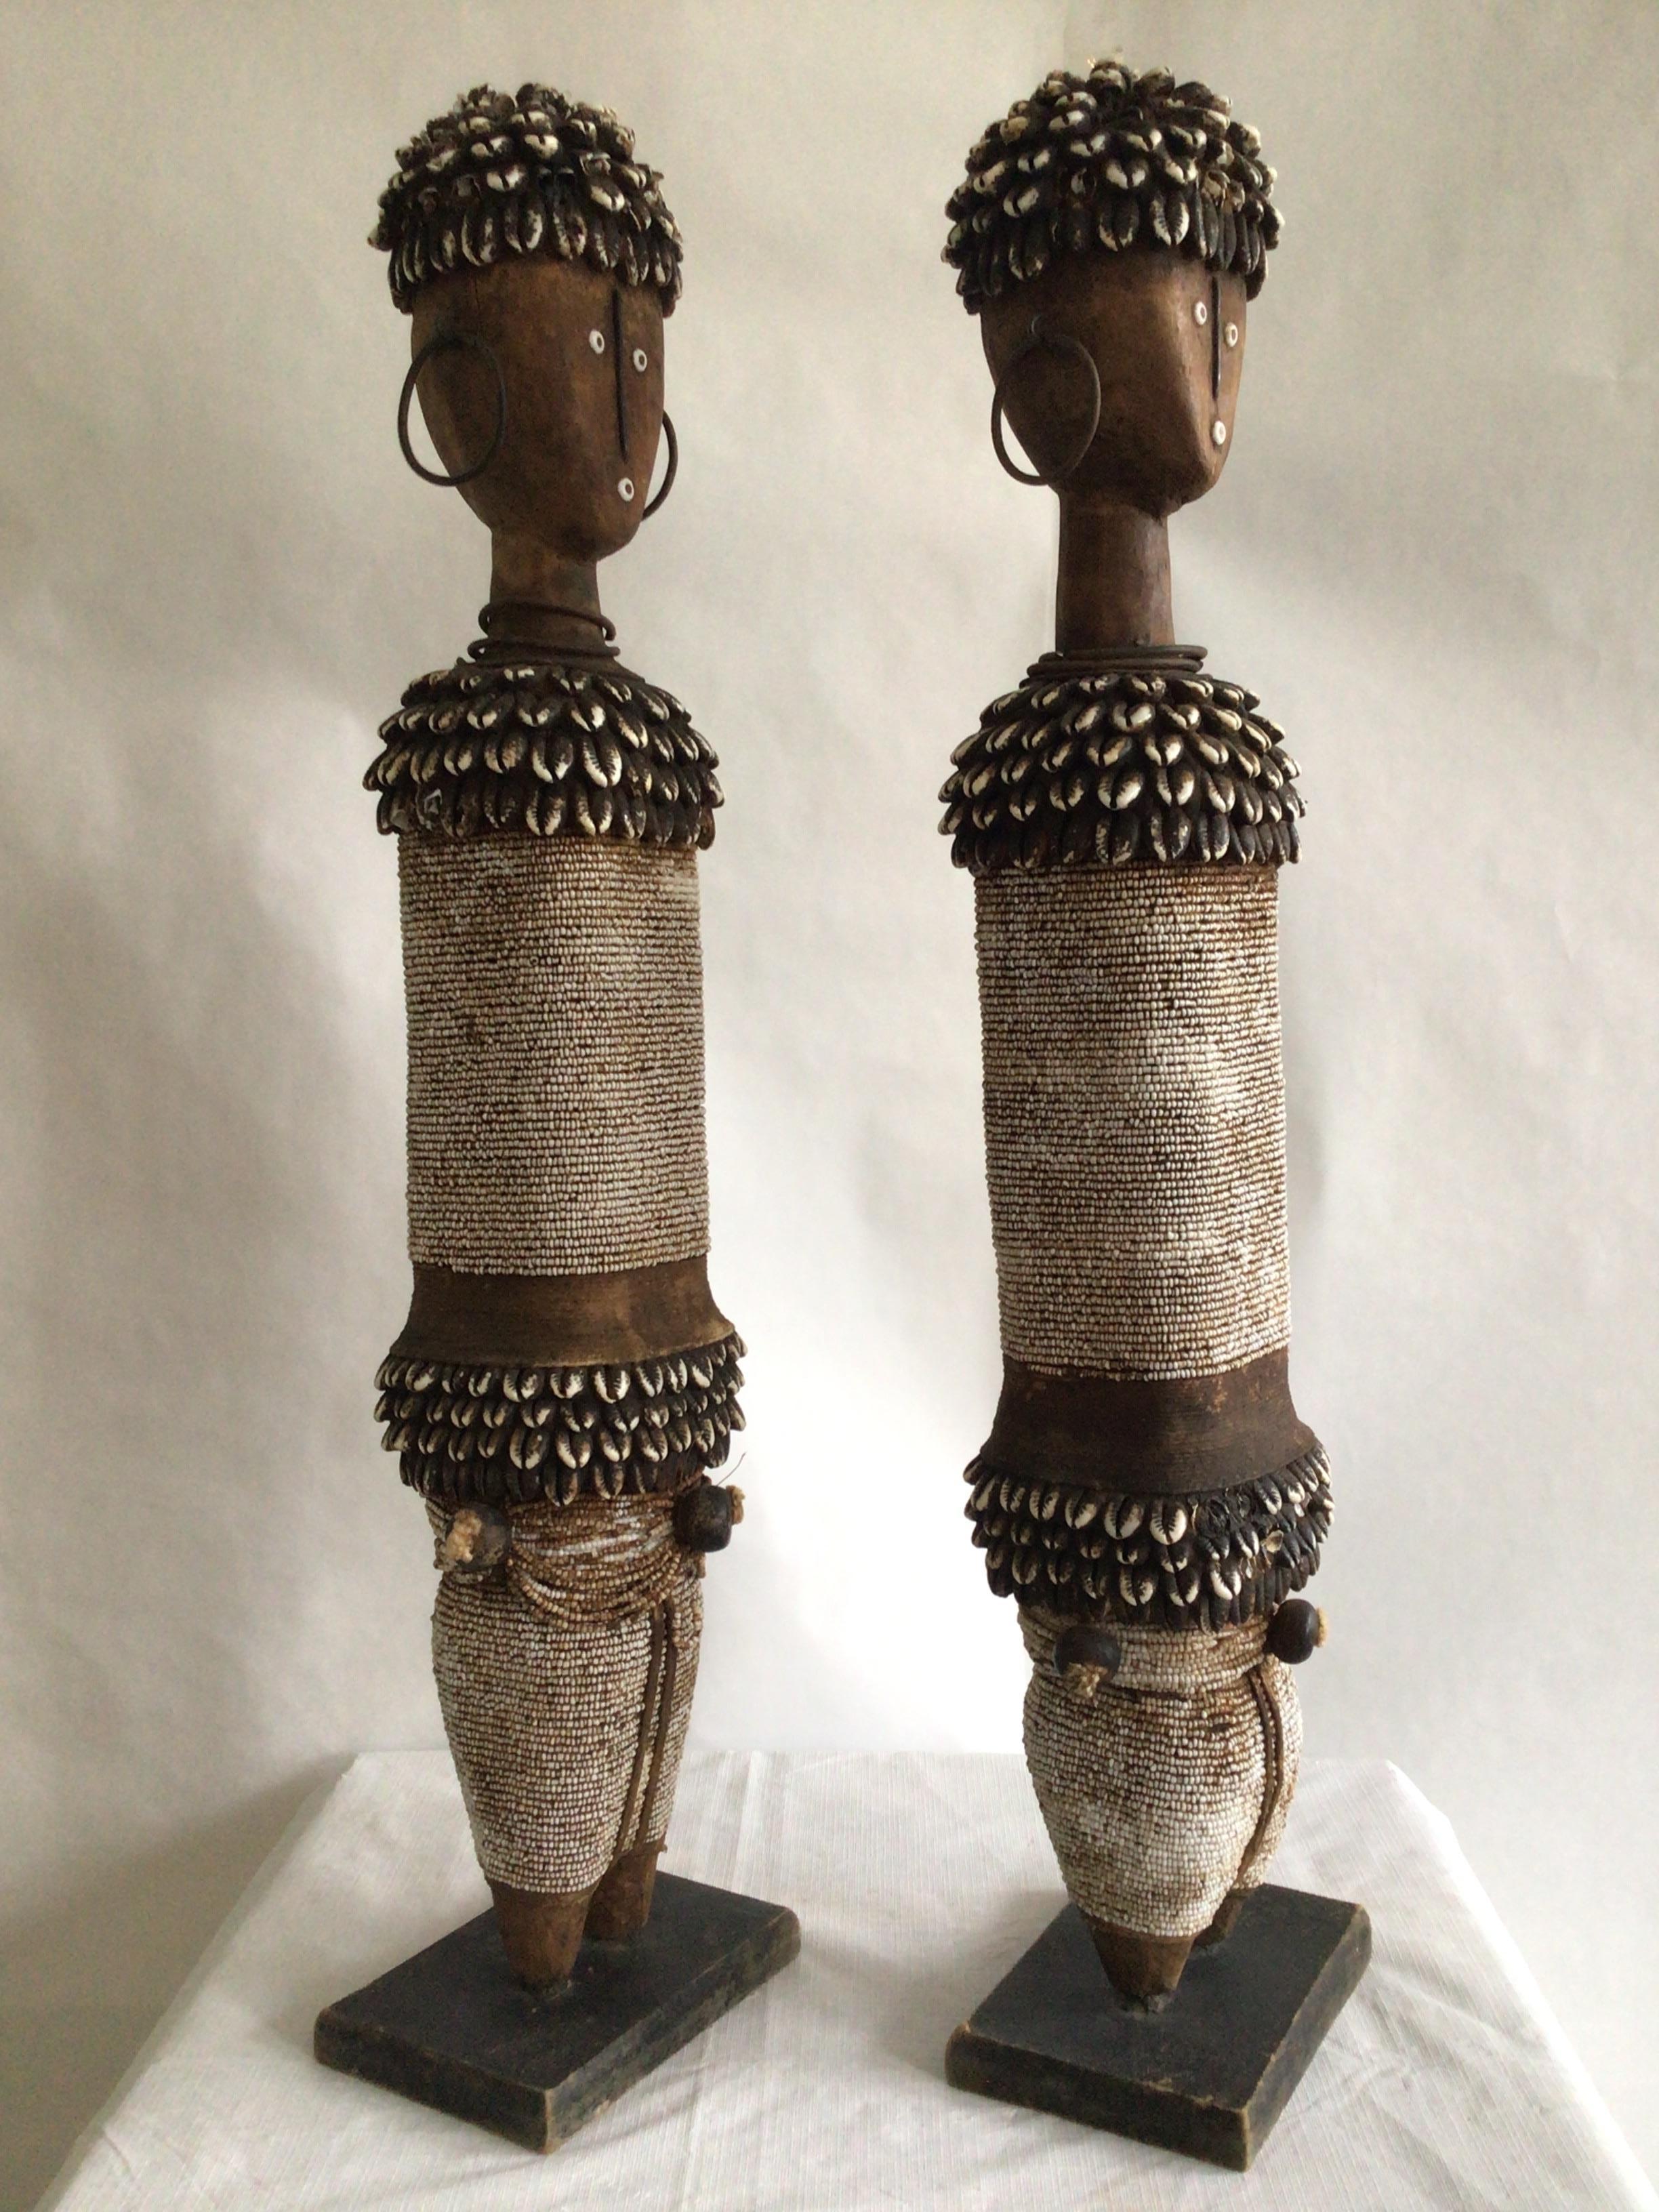 1990s Pair of Wood And Shells Beaded Namji Dolls
Made with wood, beads and cowrie shells
Metal Earings
Some cracks in the shells on top of the head 
